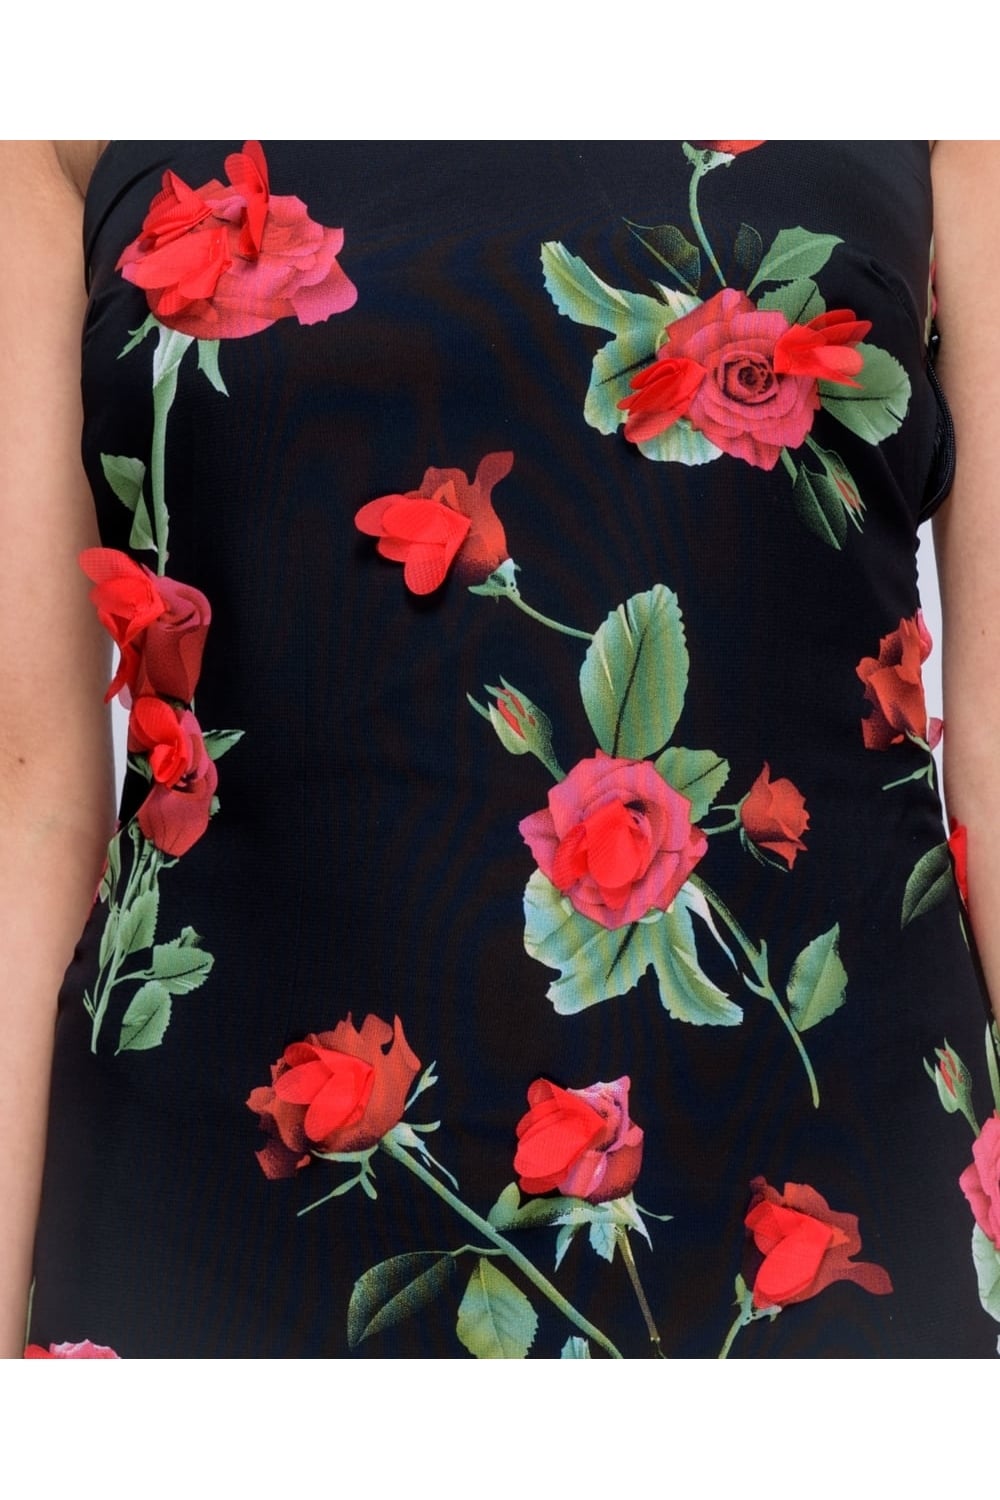 3D Rose Floral Sleeveless Maxi Dress in Black - Close Up Material View